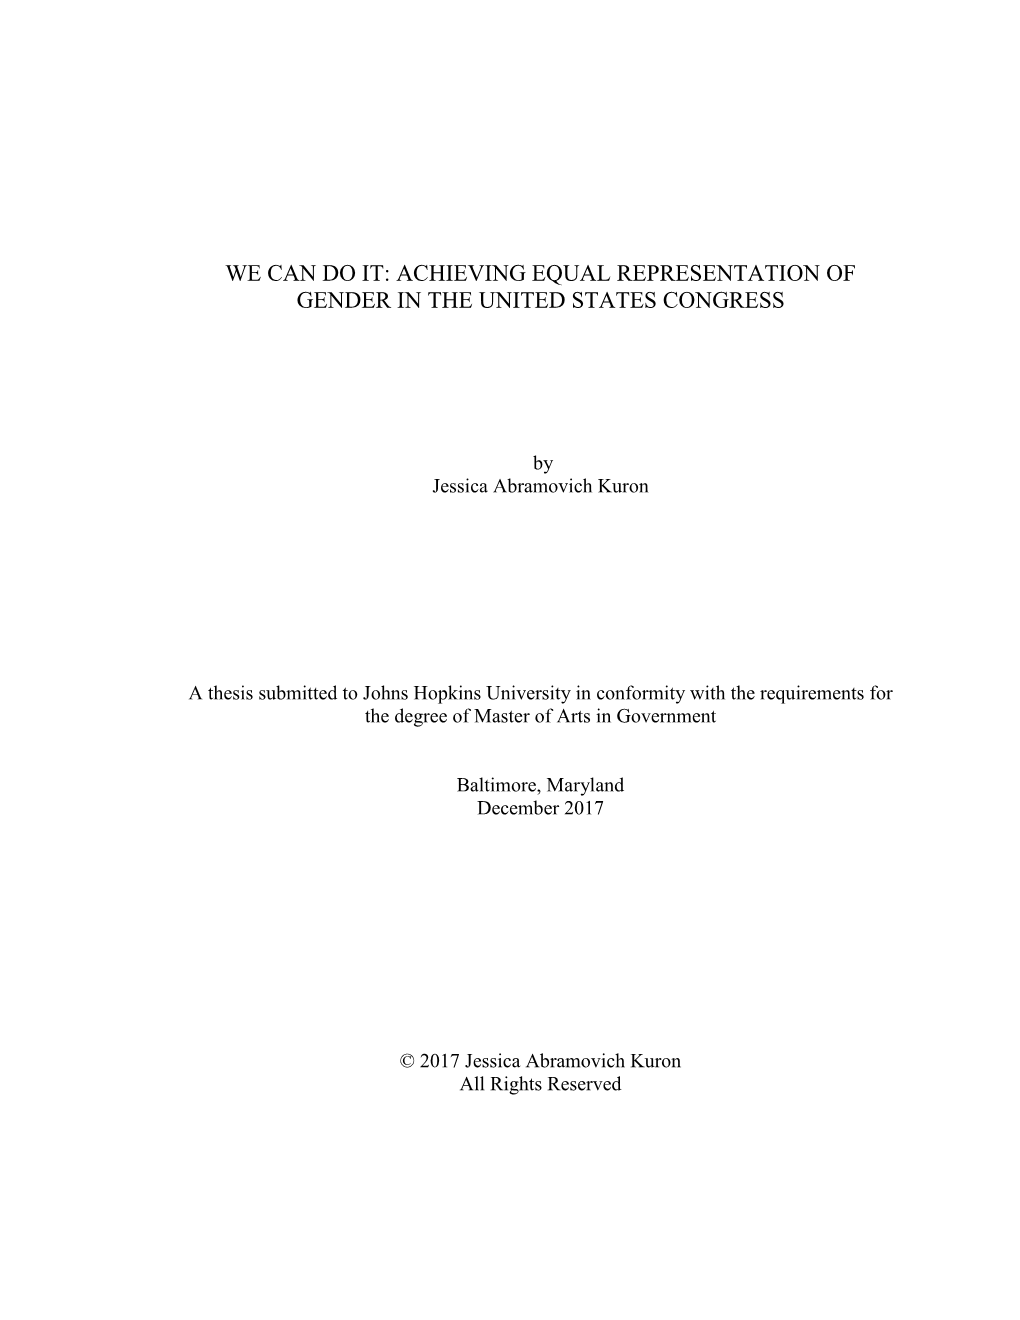 We Can Do It: Achieving Equal Representation of Gender in the United States Congress